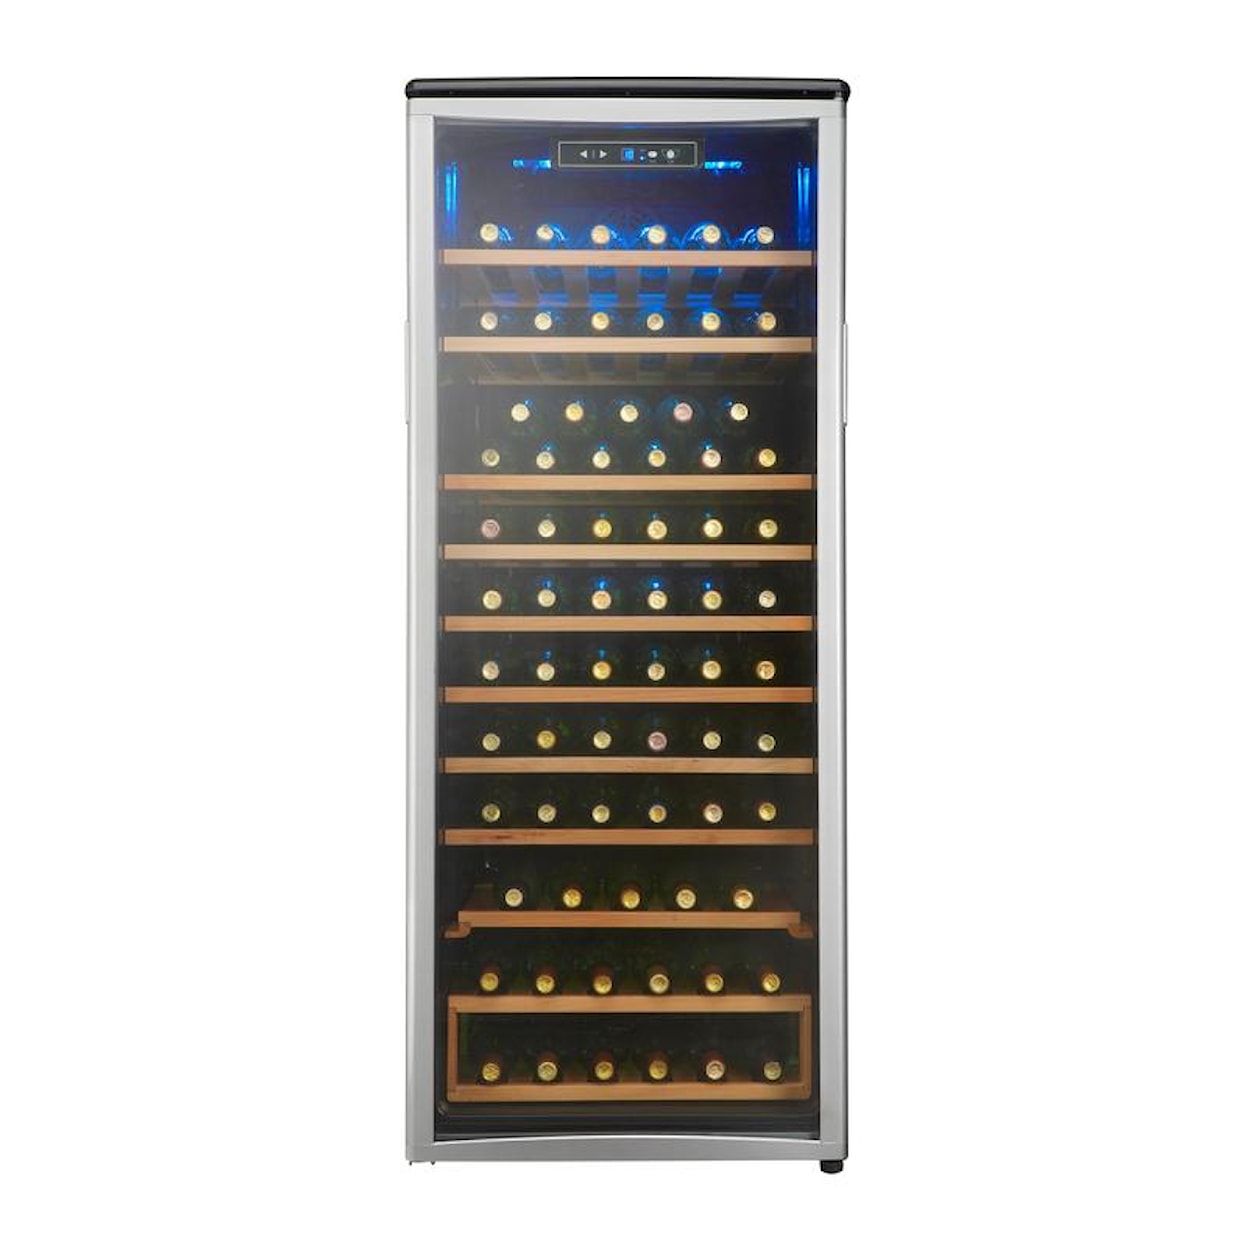 Danby Wine Coolers and Beverage Centers 10.64 cu. ft. Wine Cellar